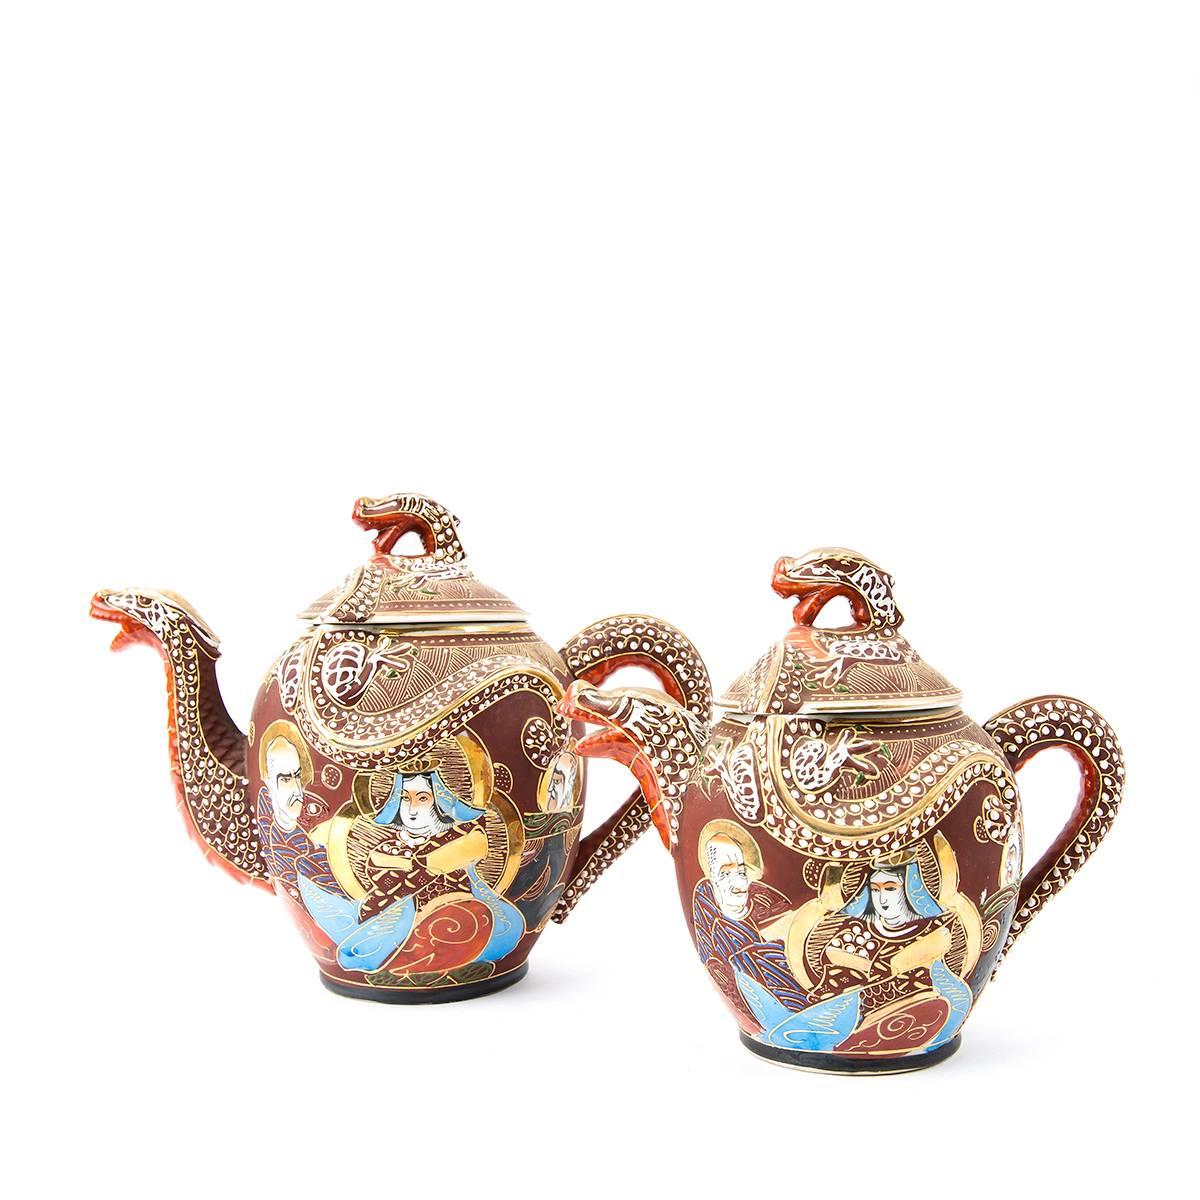 Japanese tea set. It was made in Satsuma, a province in the southern part of Kyushu. The decoration is Kyoto-style, meaning it was made in a workshop in one of the busy trade centers such as Kyoto, Yokohama, or Osaka, for export to the West. The set